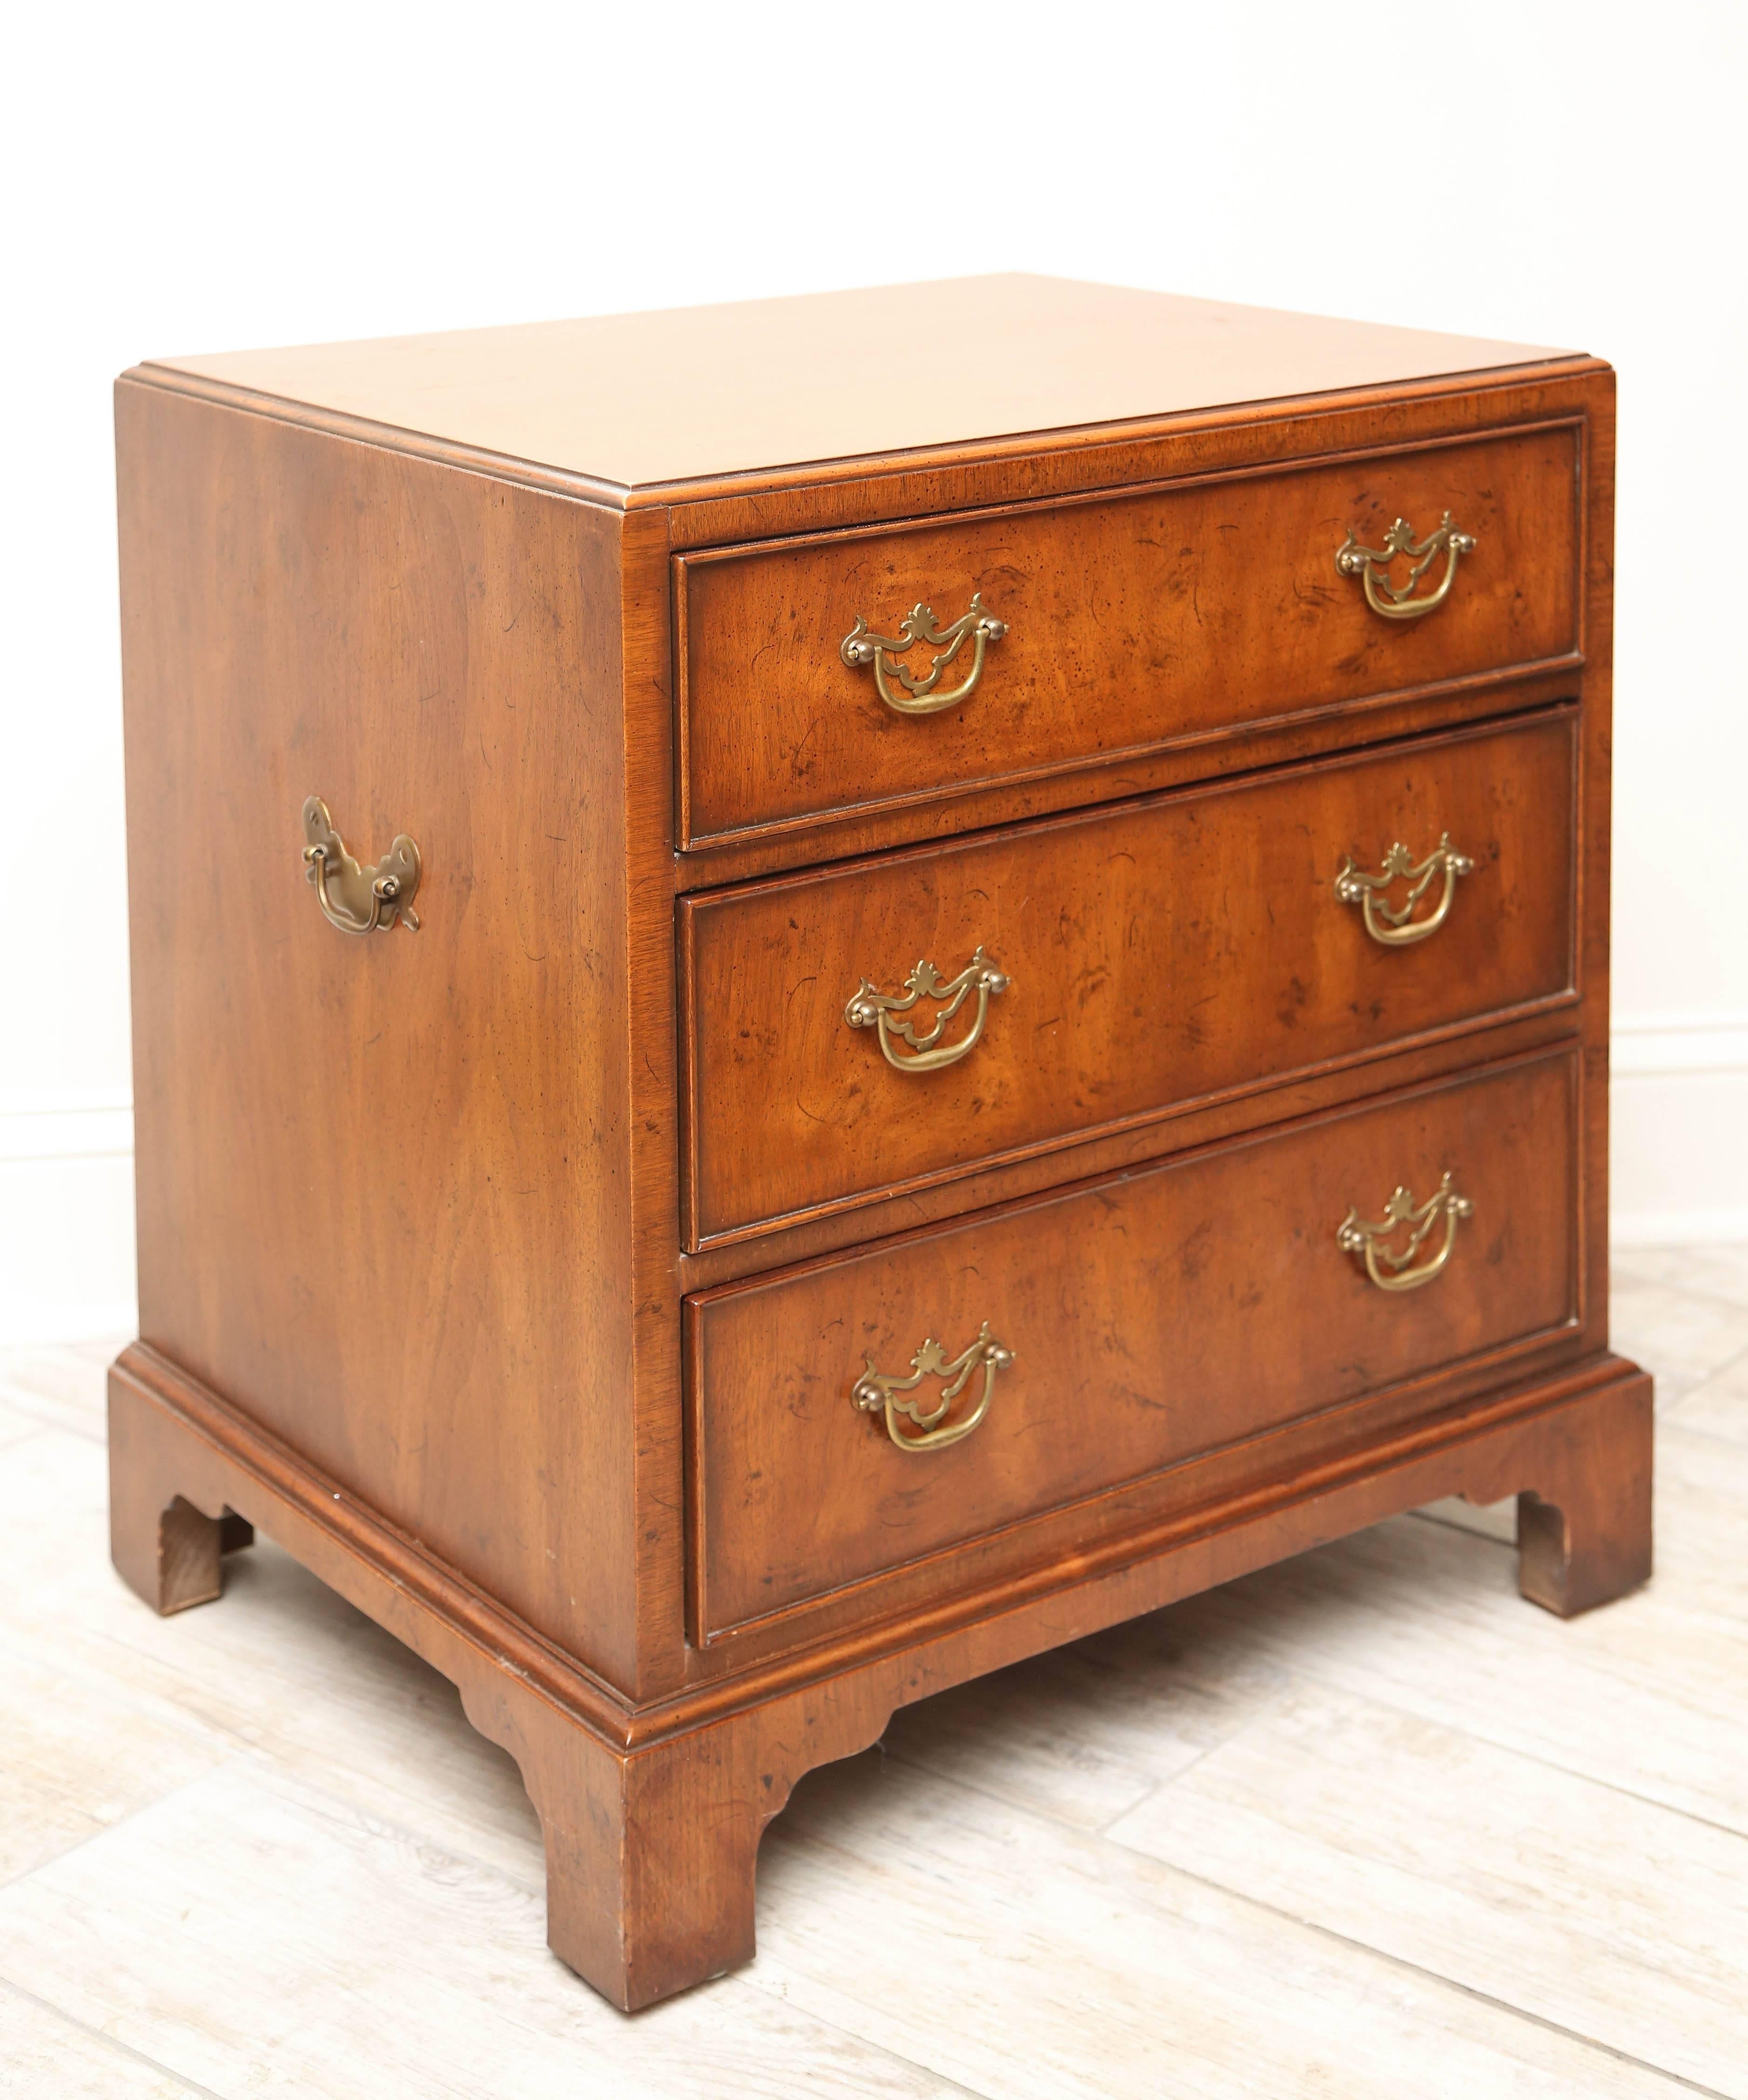 Charming three-drawer Campaign chest with brass pulls and handles on sides.